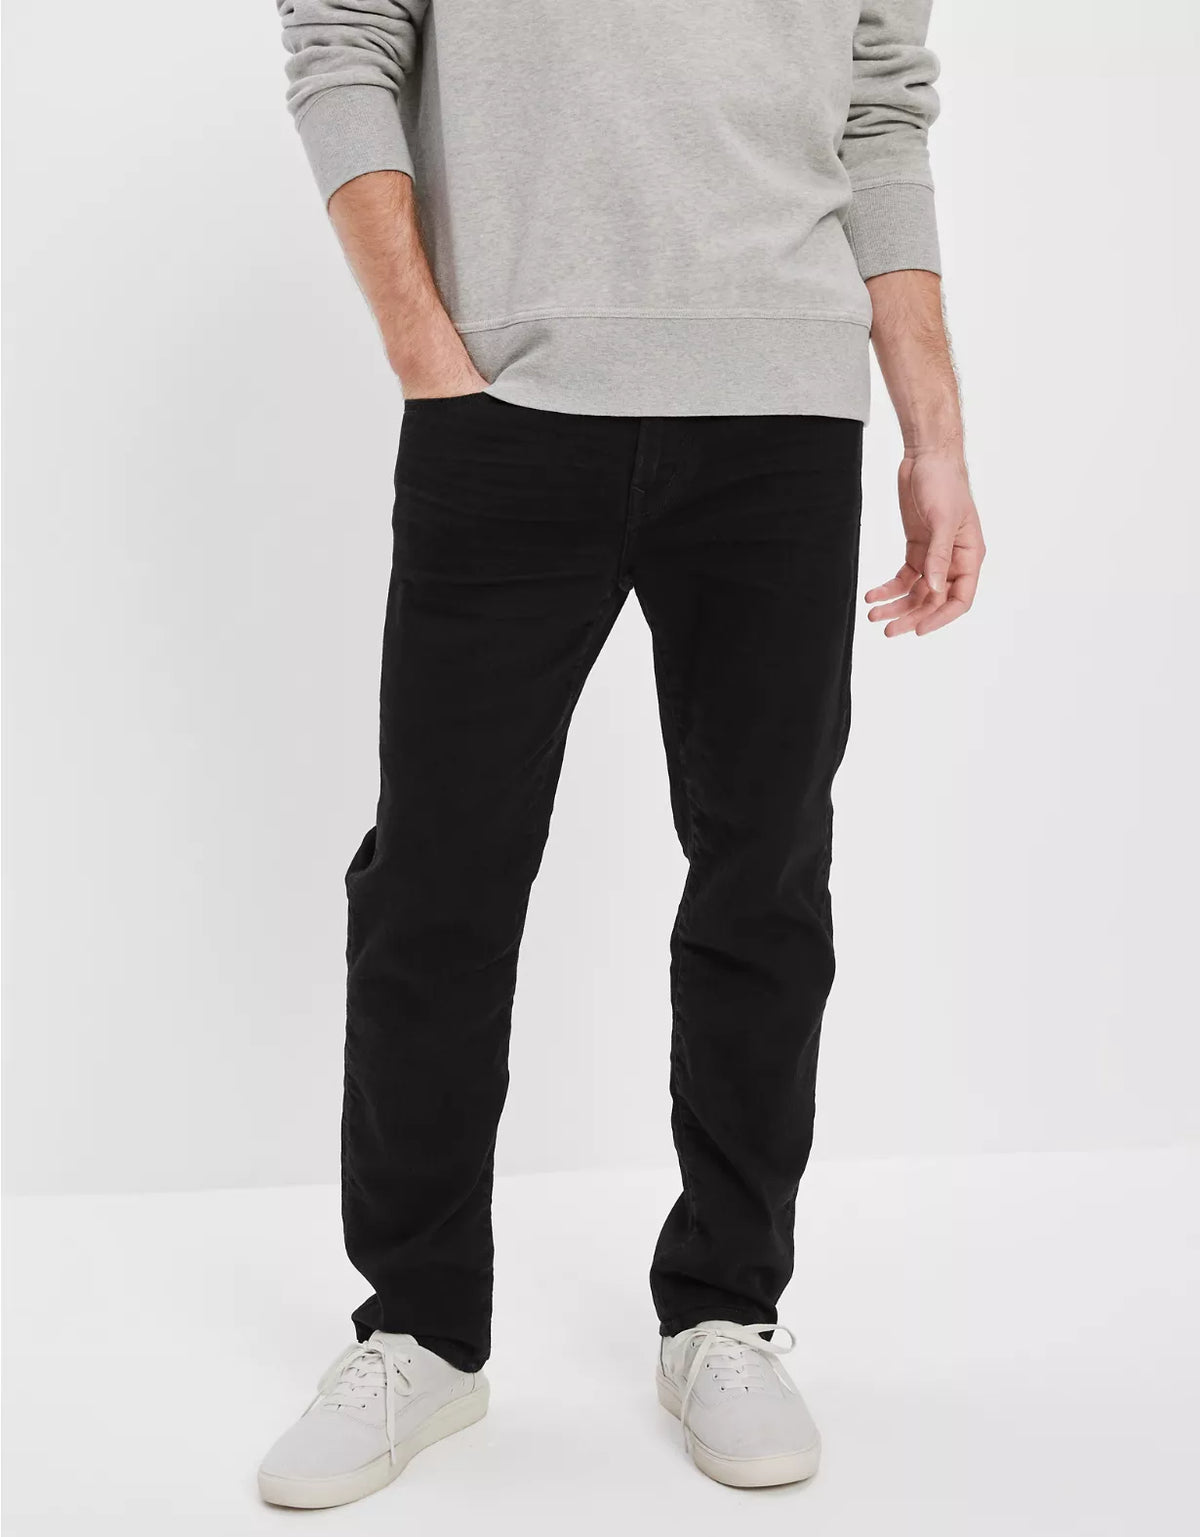 Original Straight Jeans For Men - Stylish Men's Jeans - Available In Black - AceCart